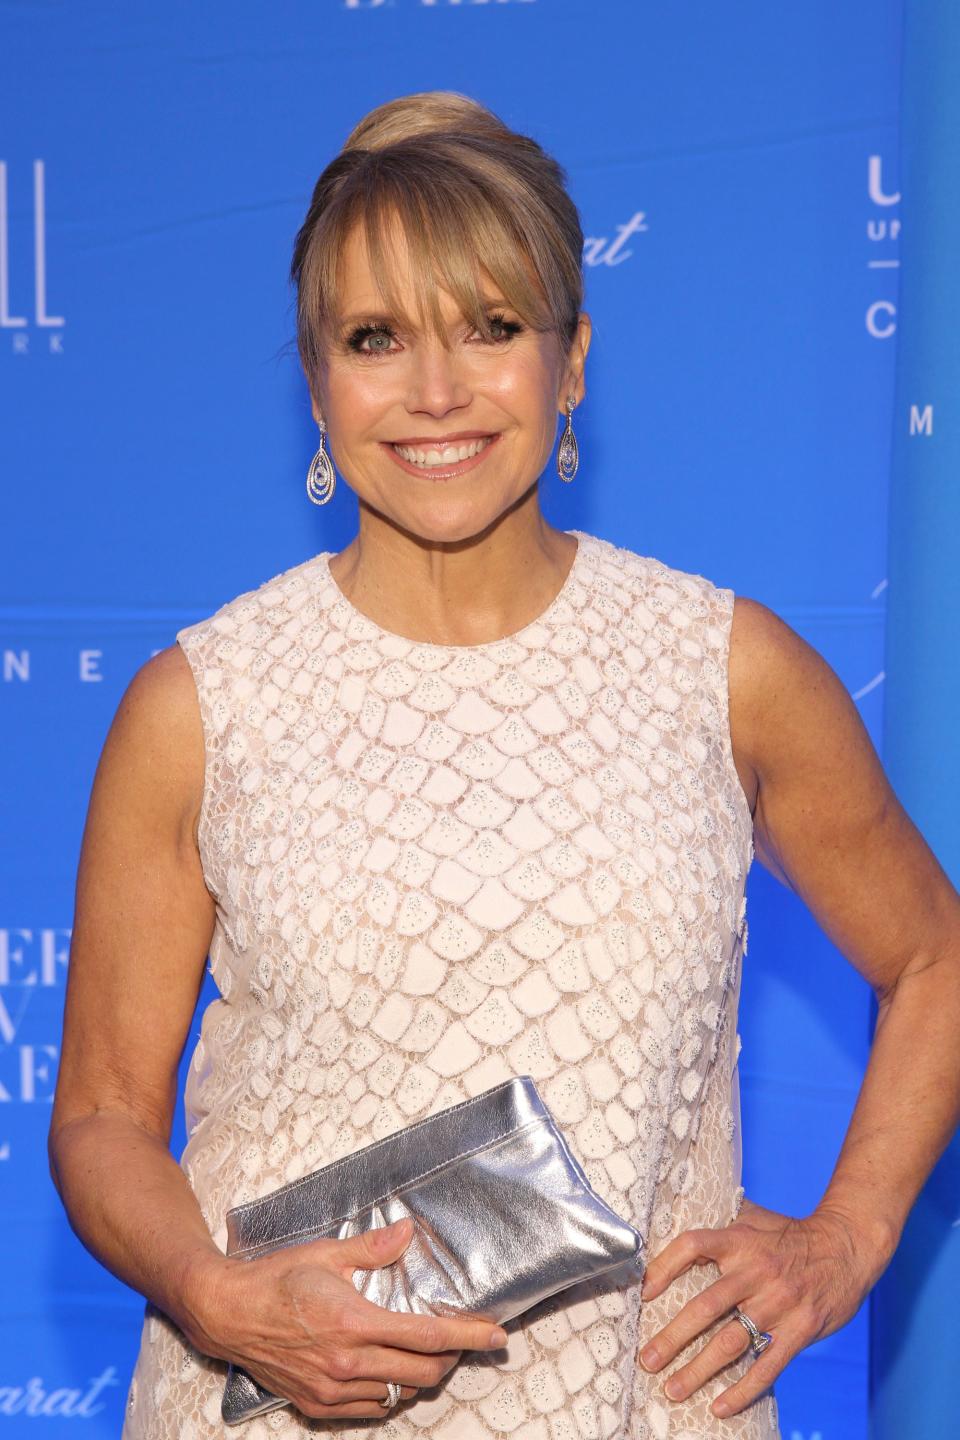 celebrities talk about menopause, Katie Couric at the 11th Annual UNICEF Snowflake Ball, New York, America - 01 Dec 2015